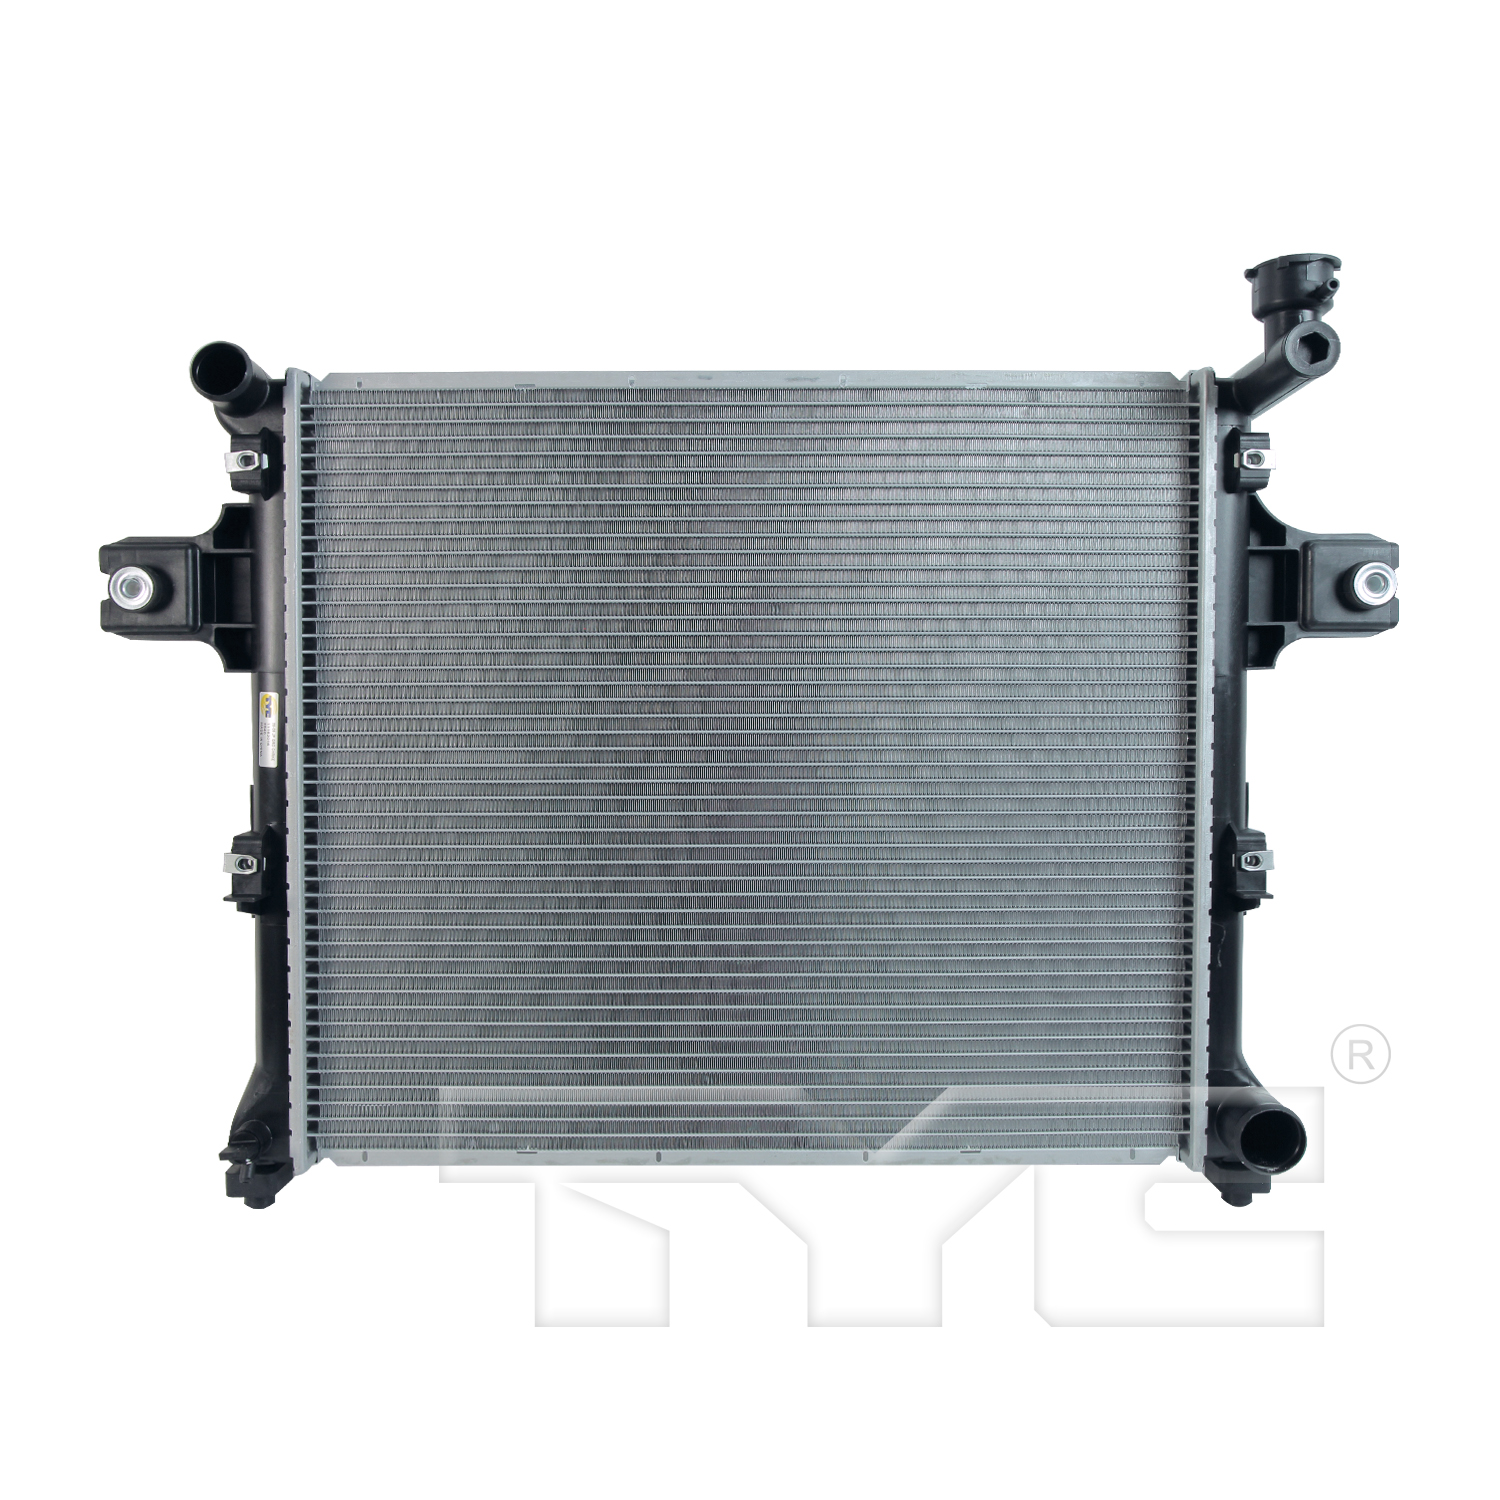 Aftermarket RADIATORS for JEEP - GRAND CHEROKEE, GRAND CHEROKEE,05-10,Radiator assembly